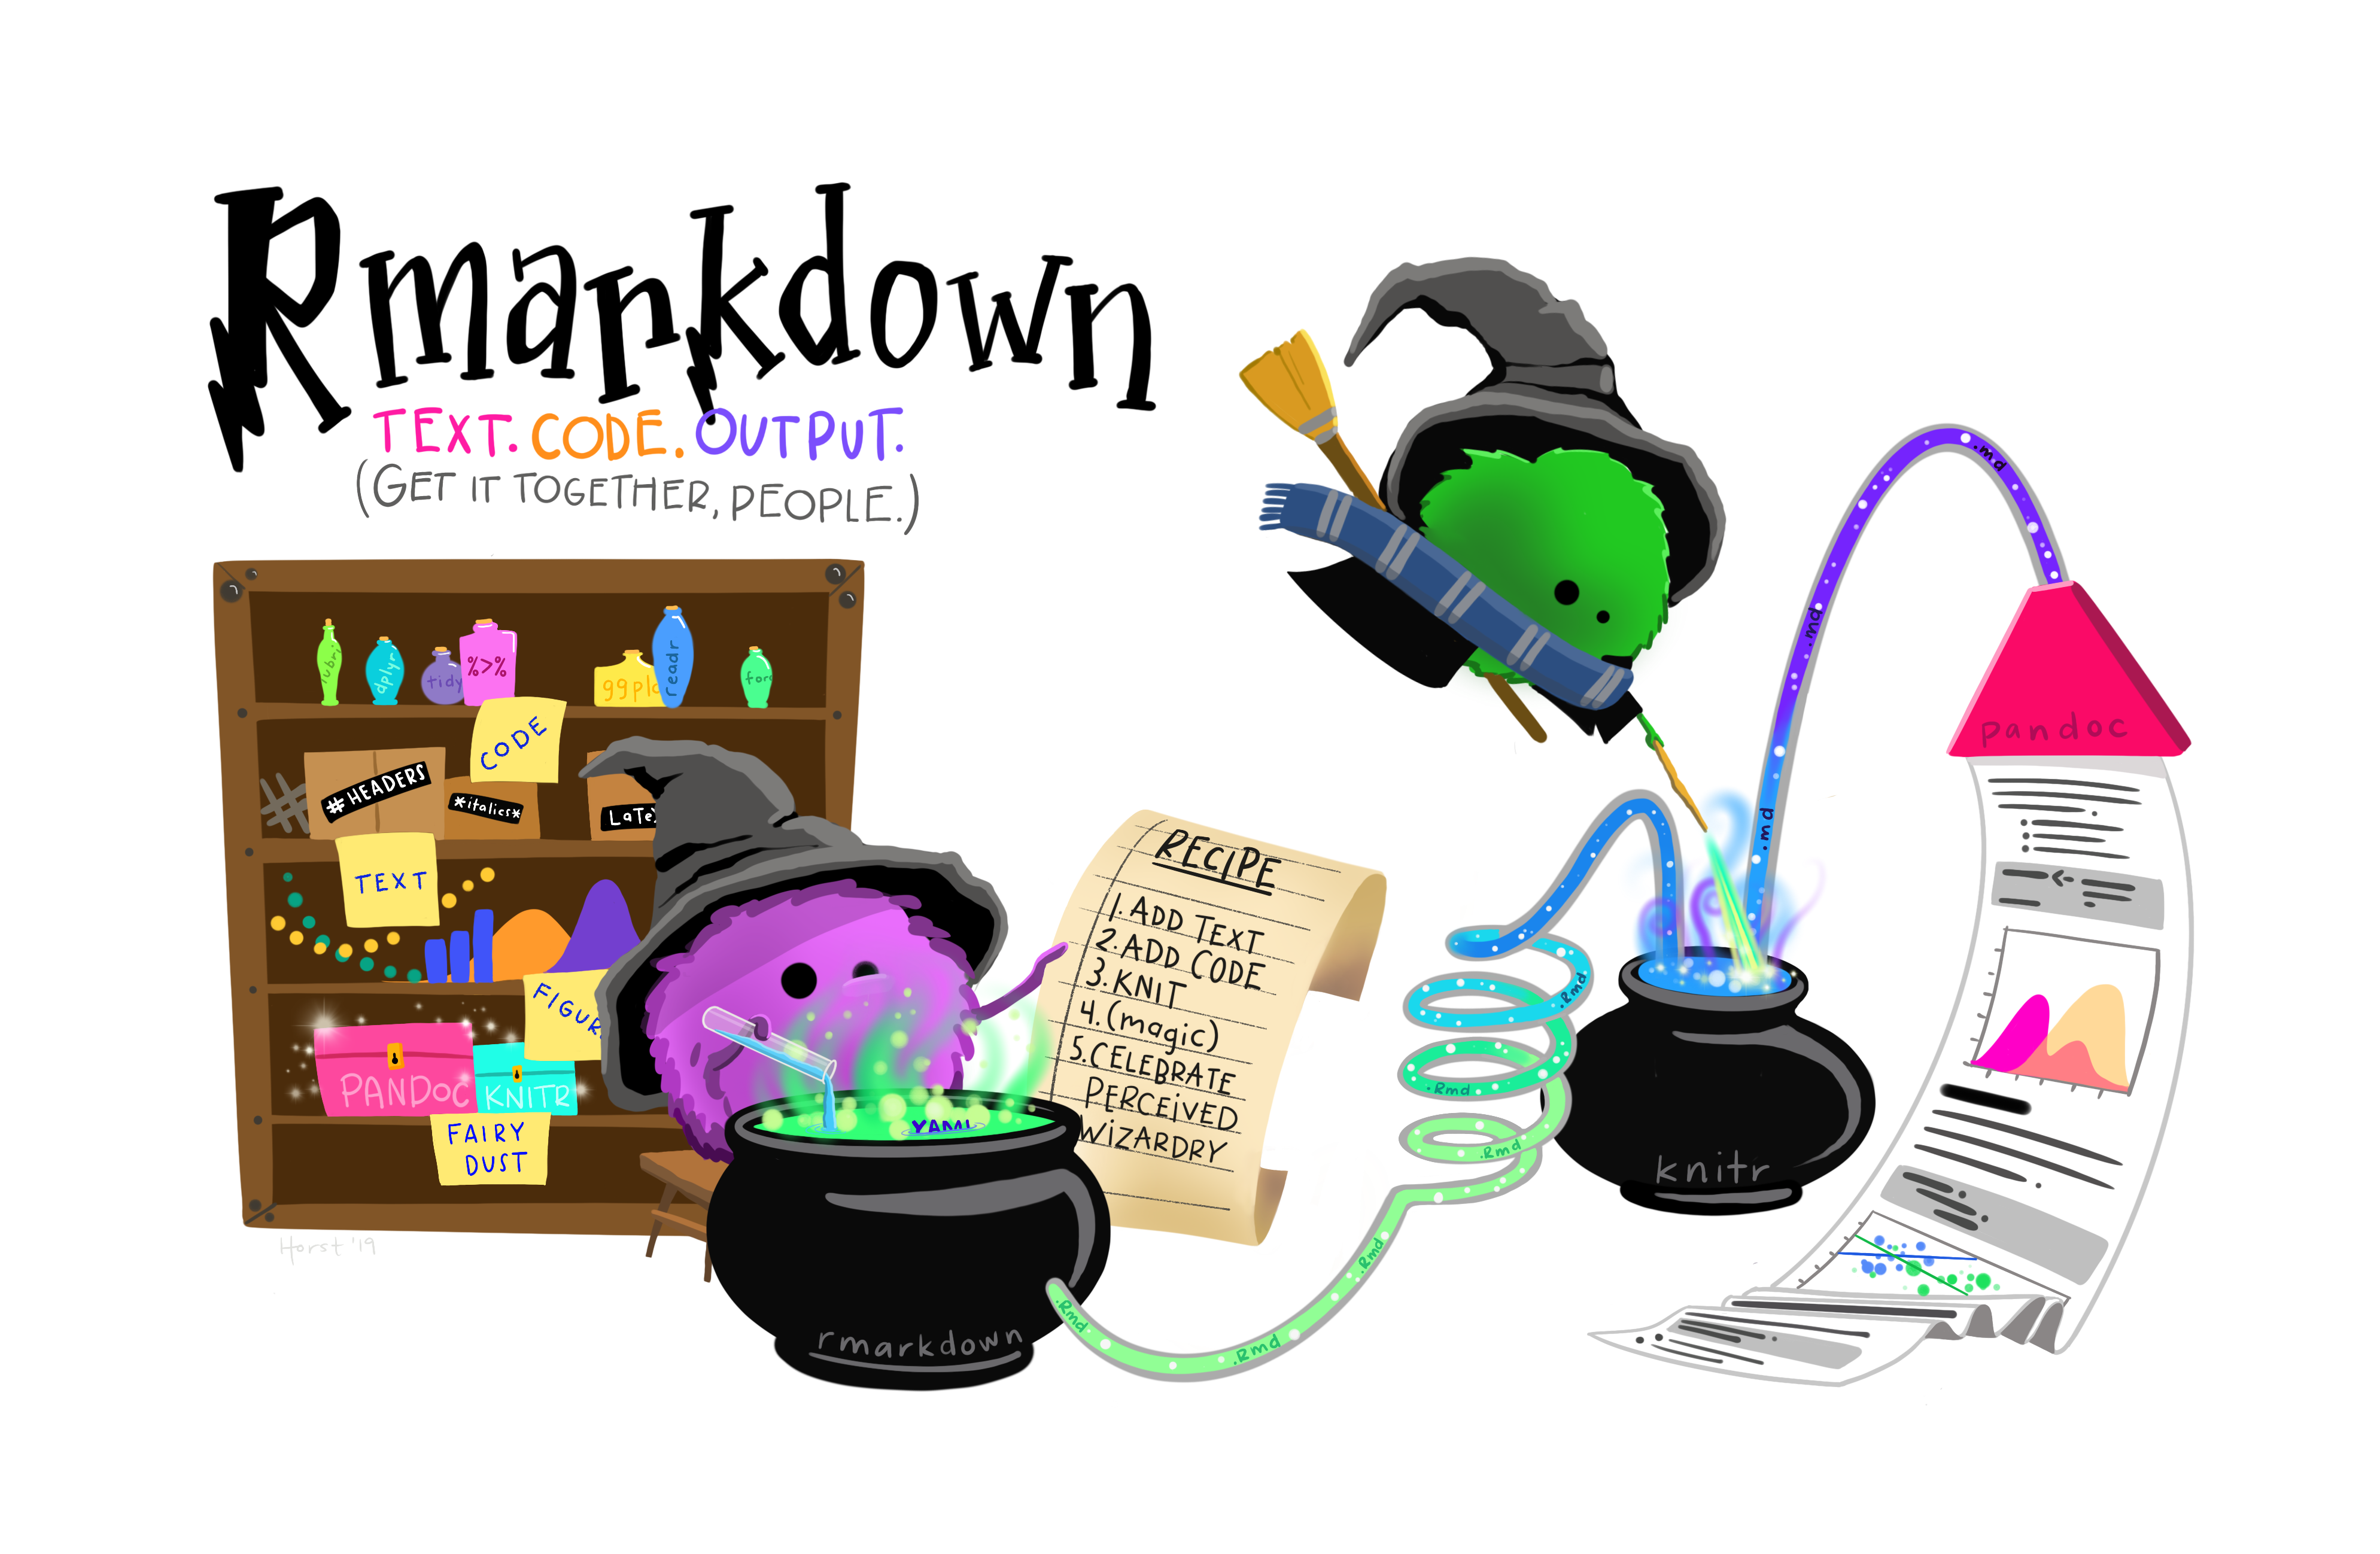 R Markdown wizard monsters creating a R Markdown document from a recipe. Art by Allison Horst